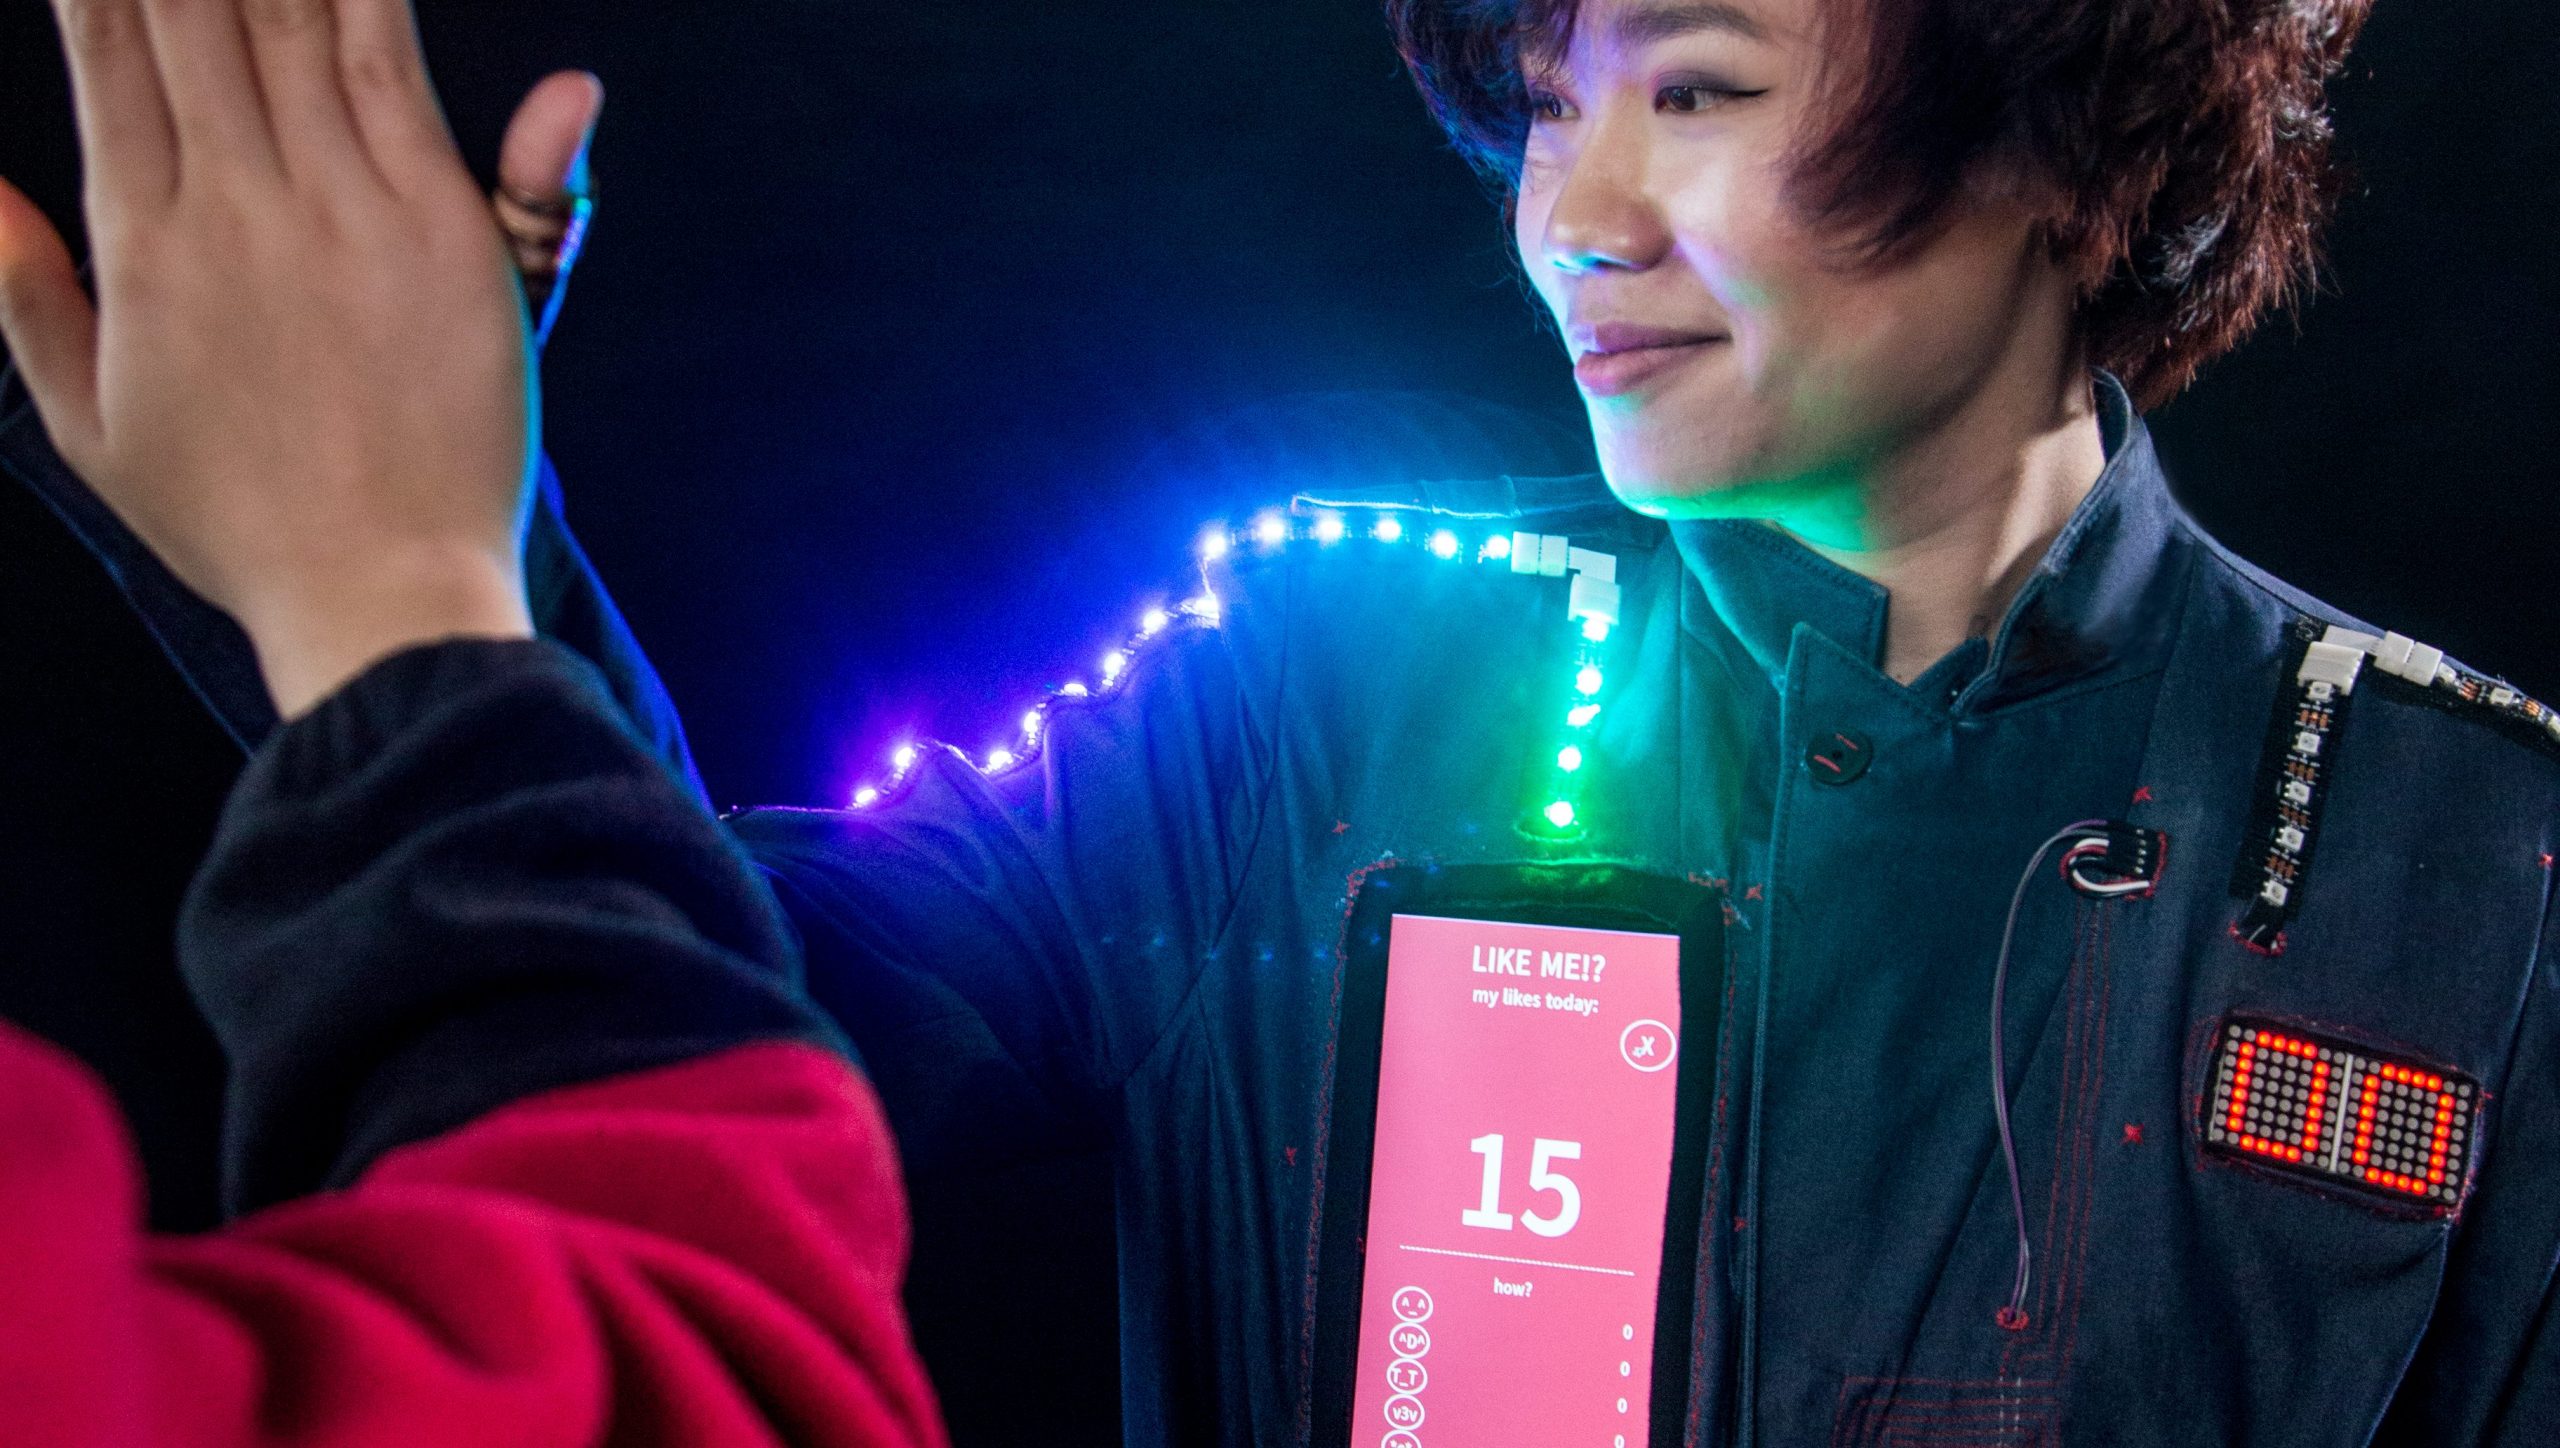 A MonthOfMaking project: Someone wearing a wearable tech project featuring LEDs, a two-digit LED matrix, and a tablet screen. The person is high-fiving someone who is out of view.